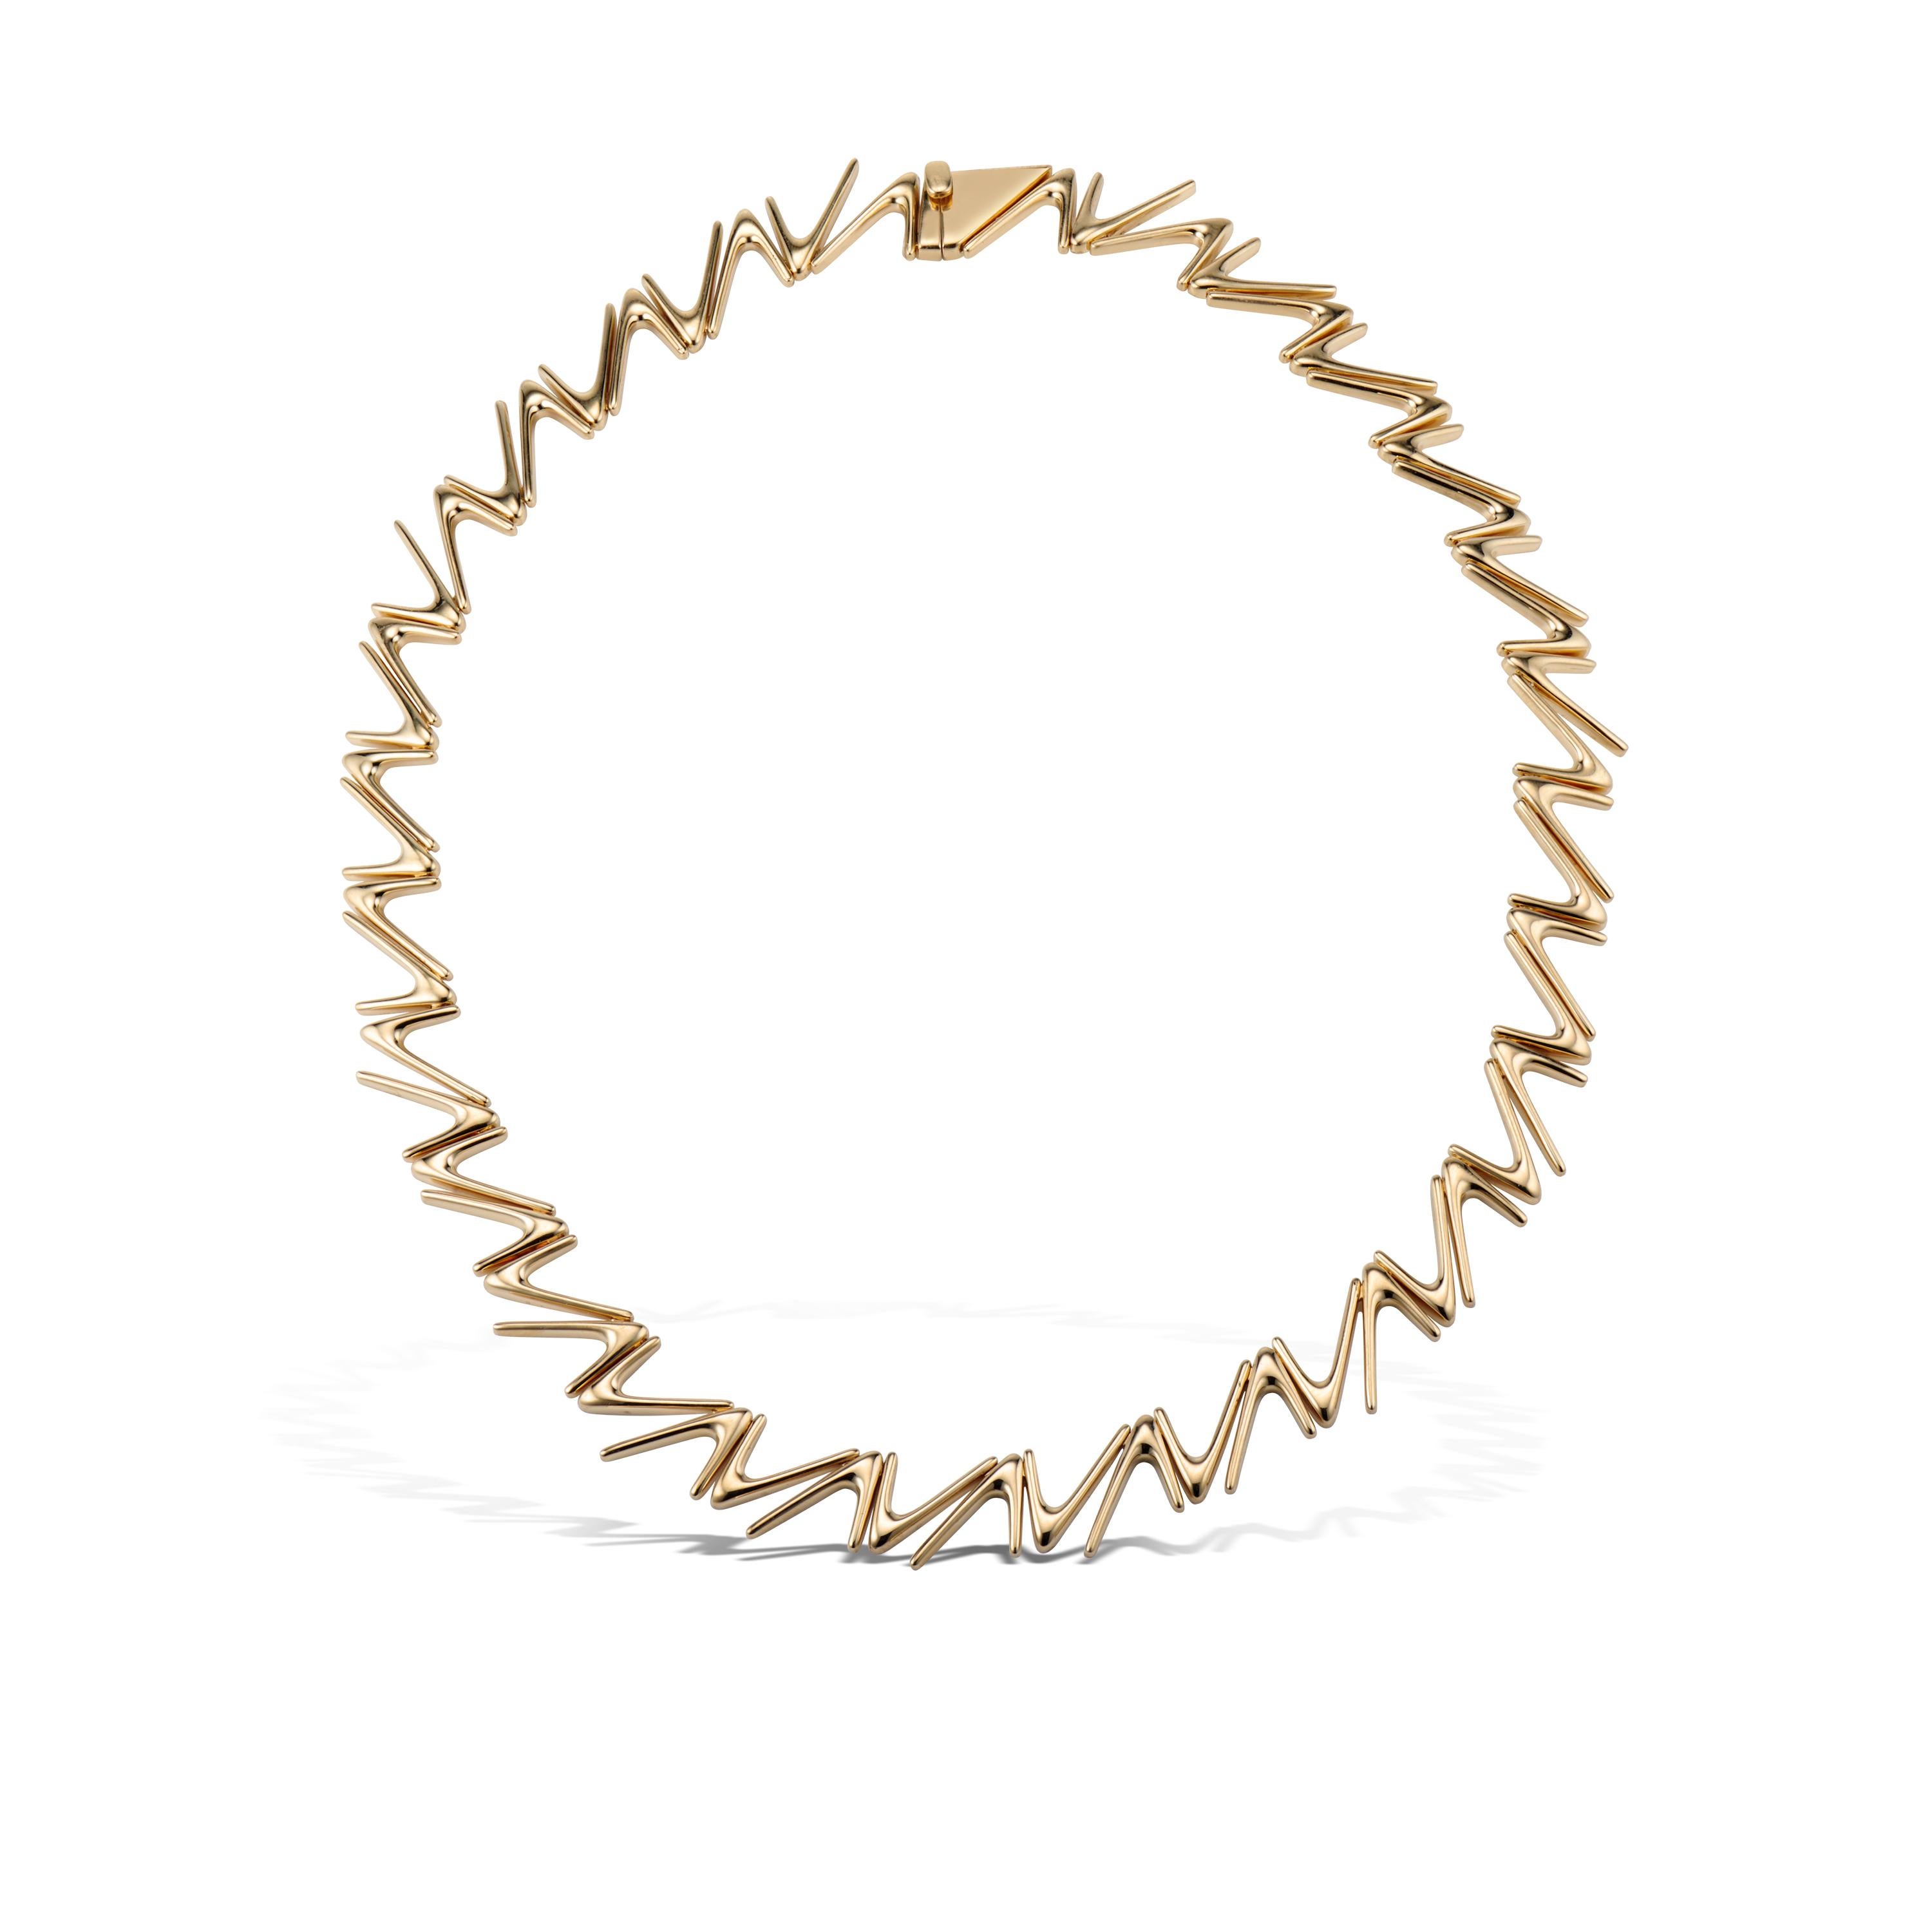 The SPIKE Chain is meticulously crafted to gracefully conform to the contours of your neck with every motion. This chain transcends conventional design norms, boasting a distinctly contemporary allure that imbues the wearer with a palpable sense of